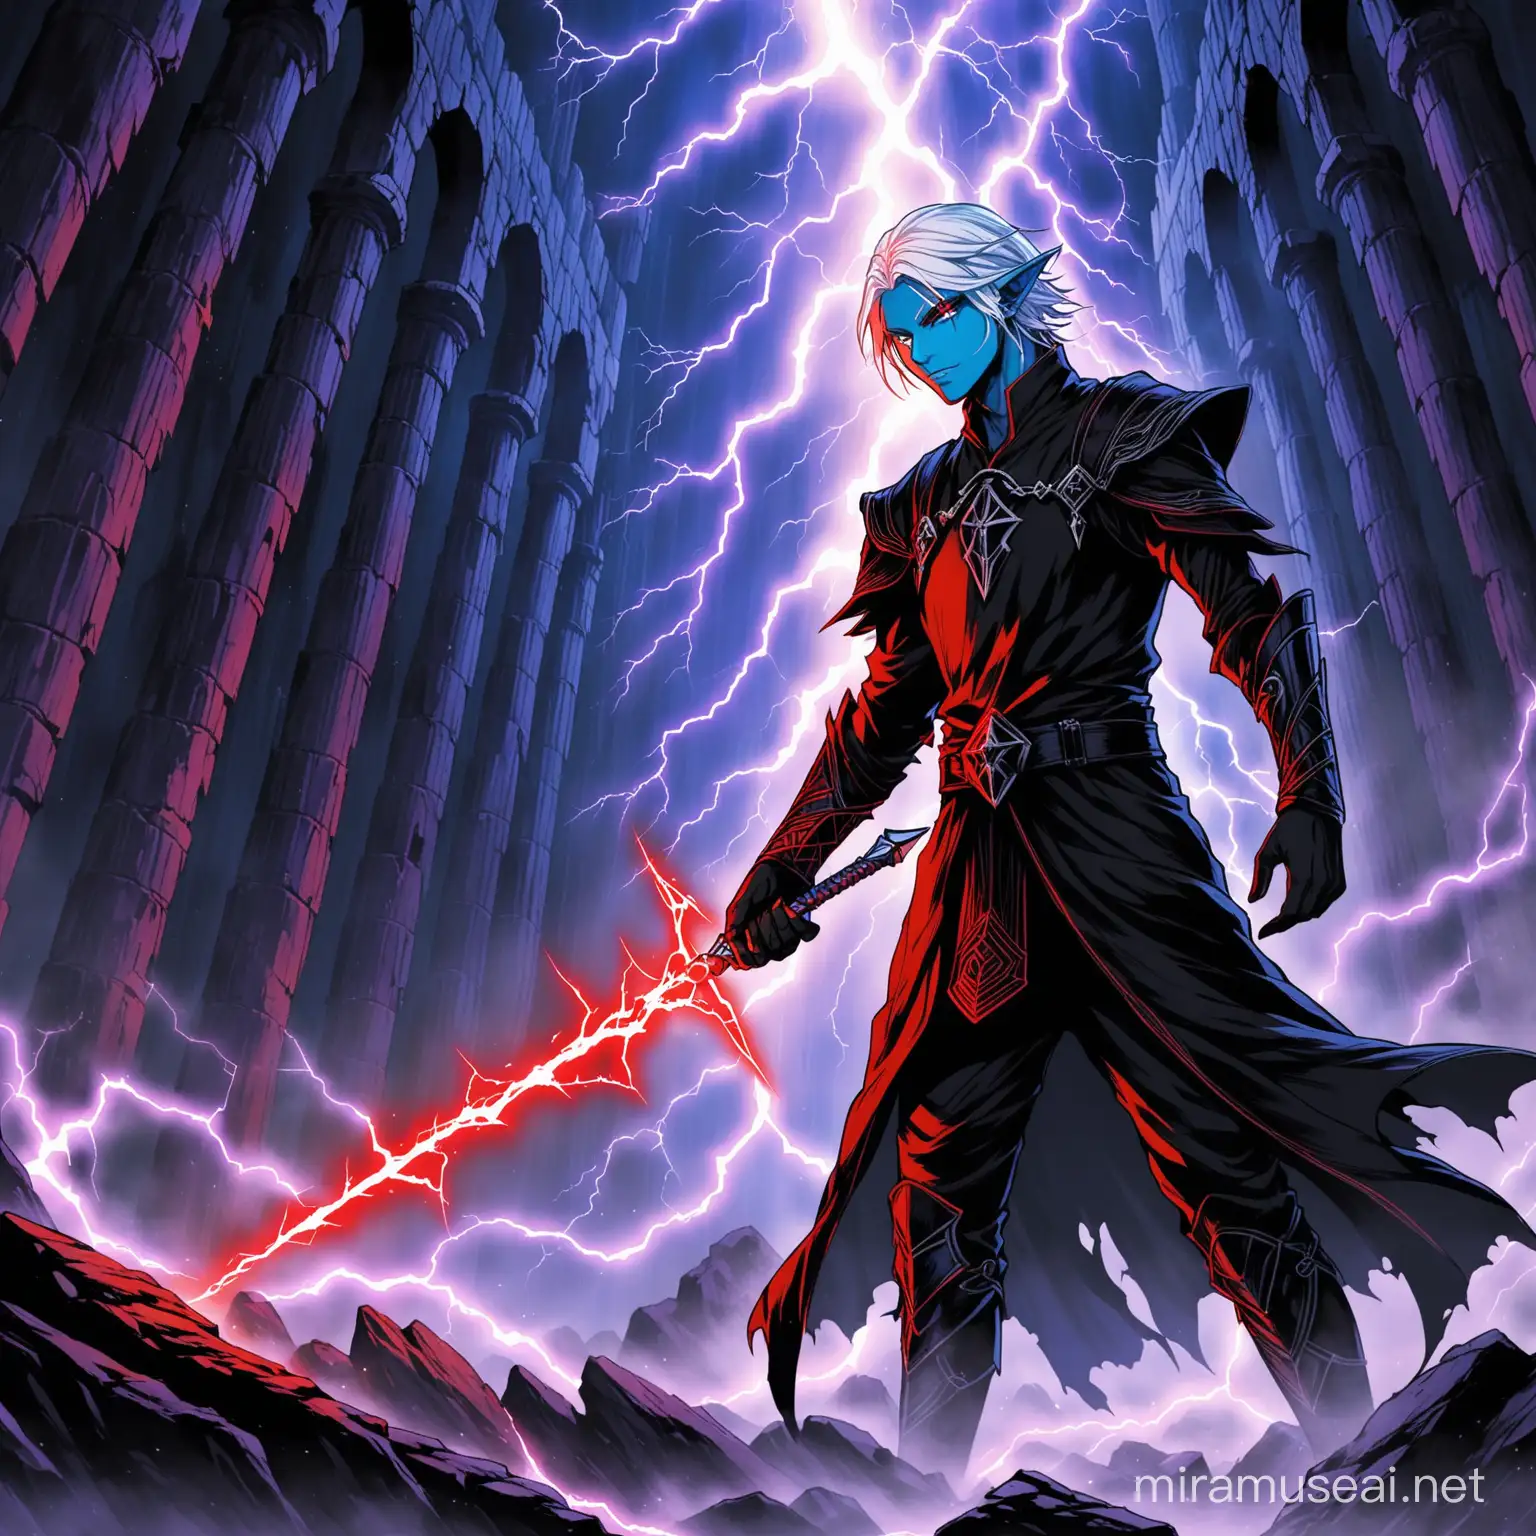 a blue skinned male elf, he has a black runes on the left side of his face, his hair is white, and the roots of his hair is black, his hair is short and wild, he has heterochromia, his left eye is neon red, his right eye is hazel, he wears black clothes like a sith from star wars, and he has an aura of lightning, the lightning is red, and he is standing in an ancient castle ruin, he has black gloves, he controls the lightning with his right hand.